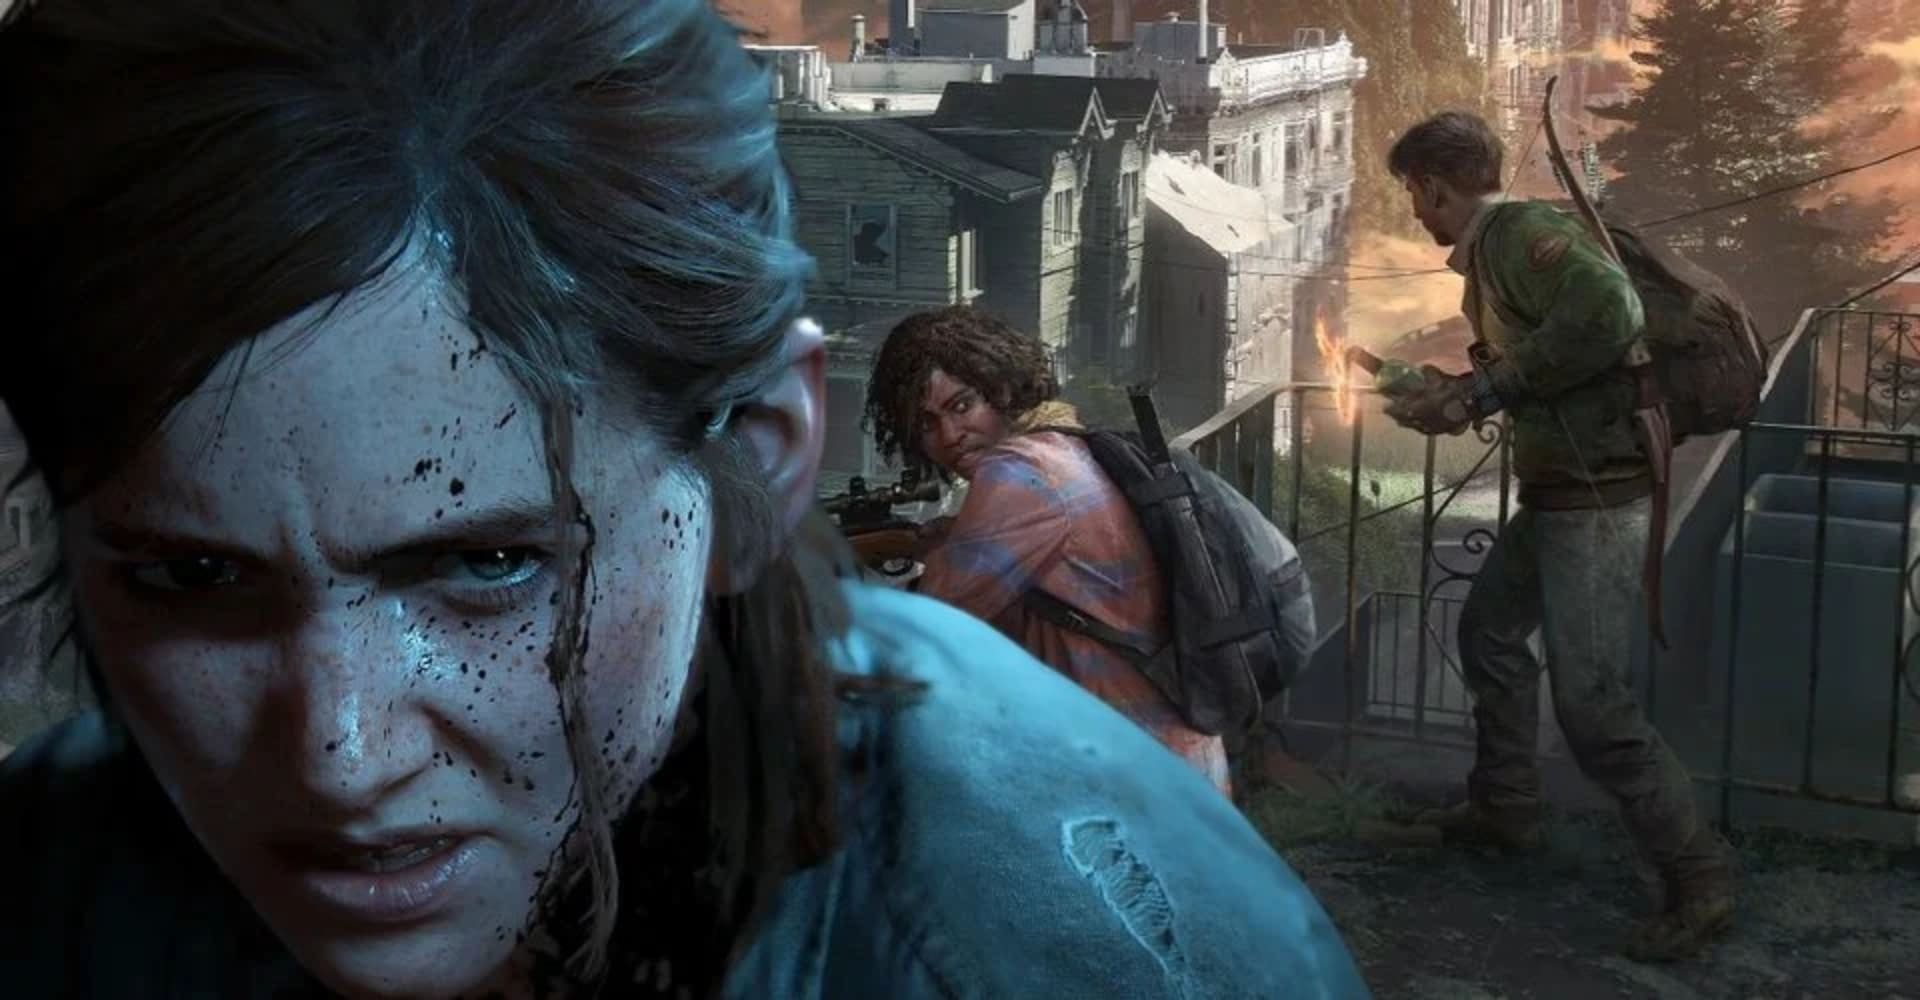 TLOU2-First-Look-Image-Multiplayer-GamersRD (1)